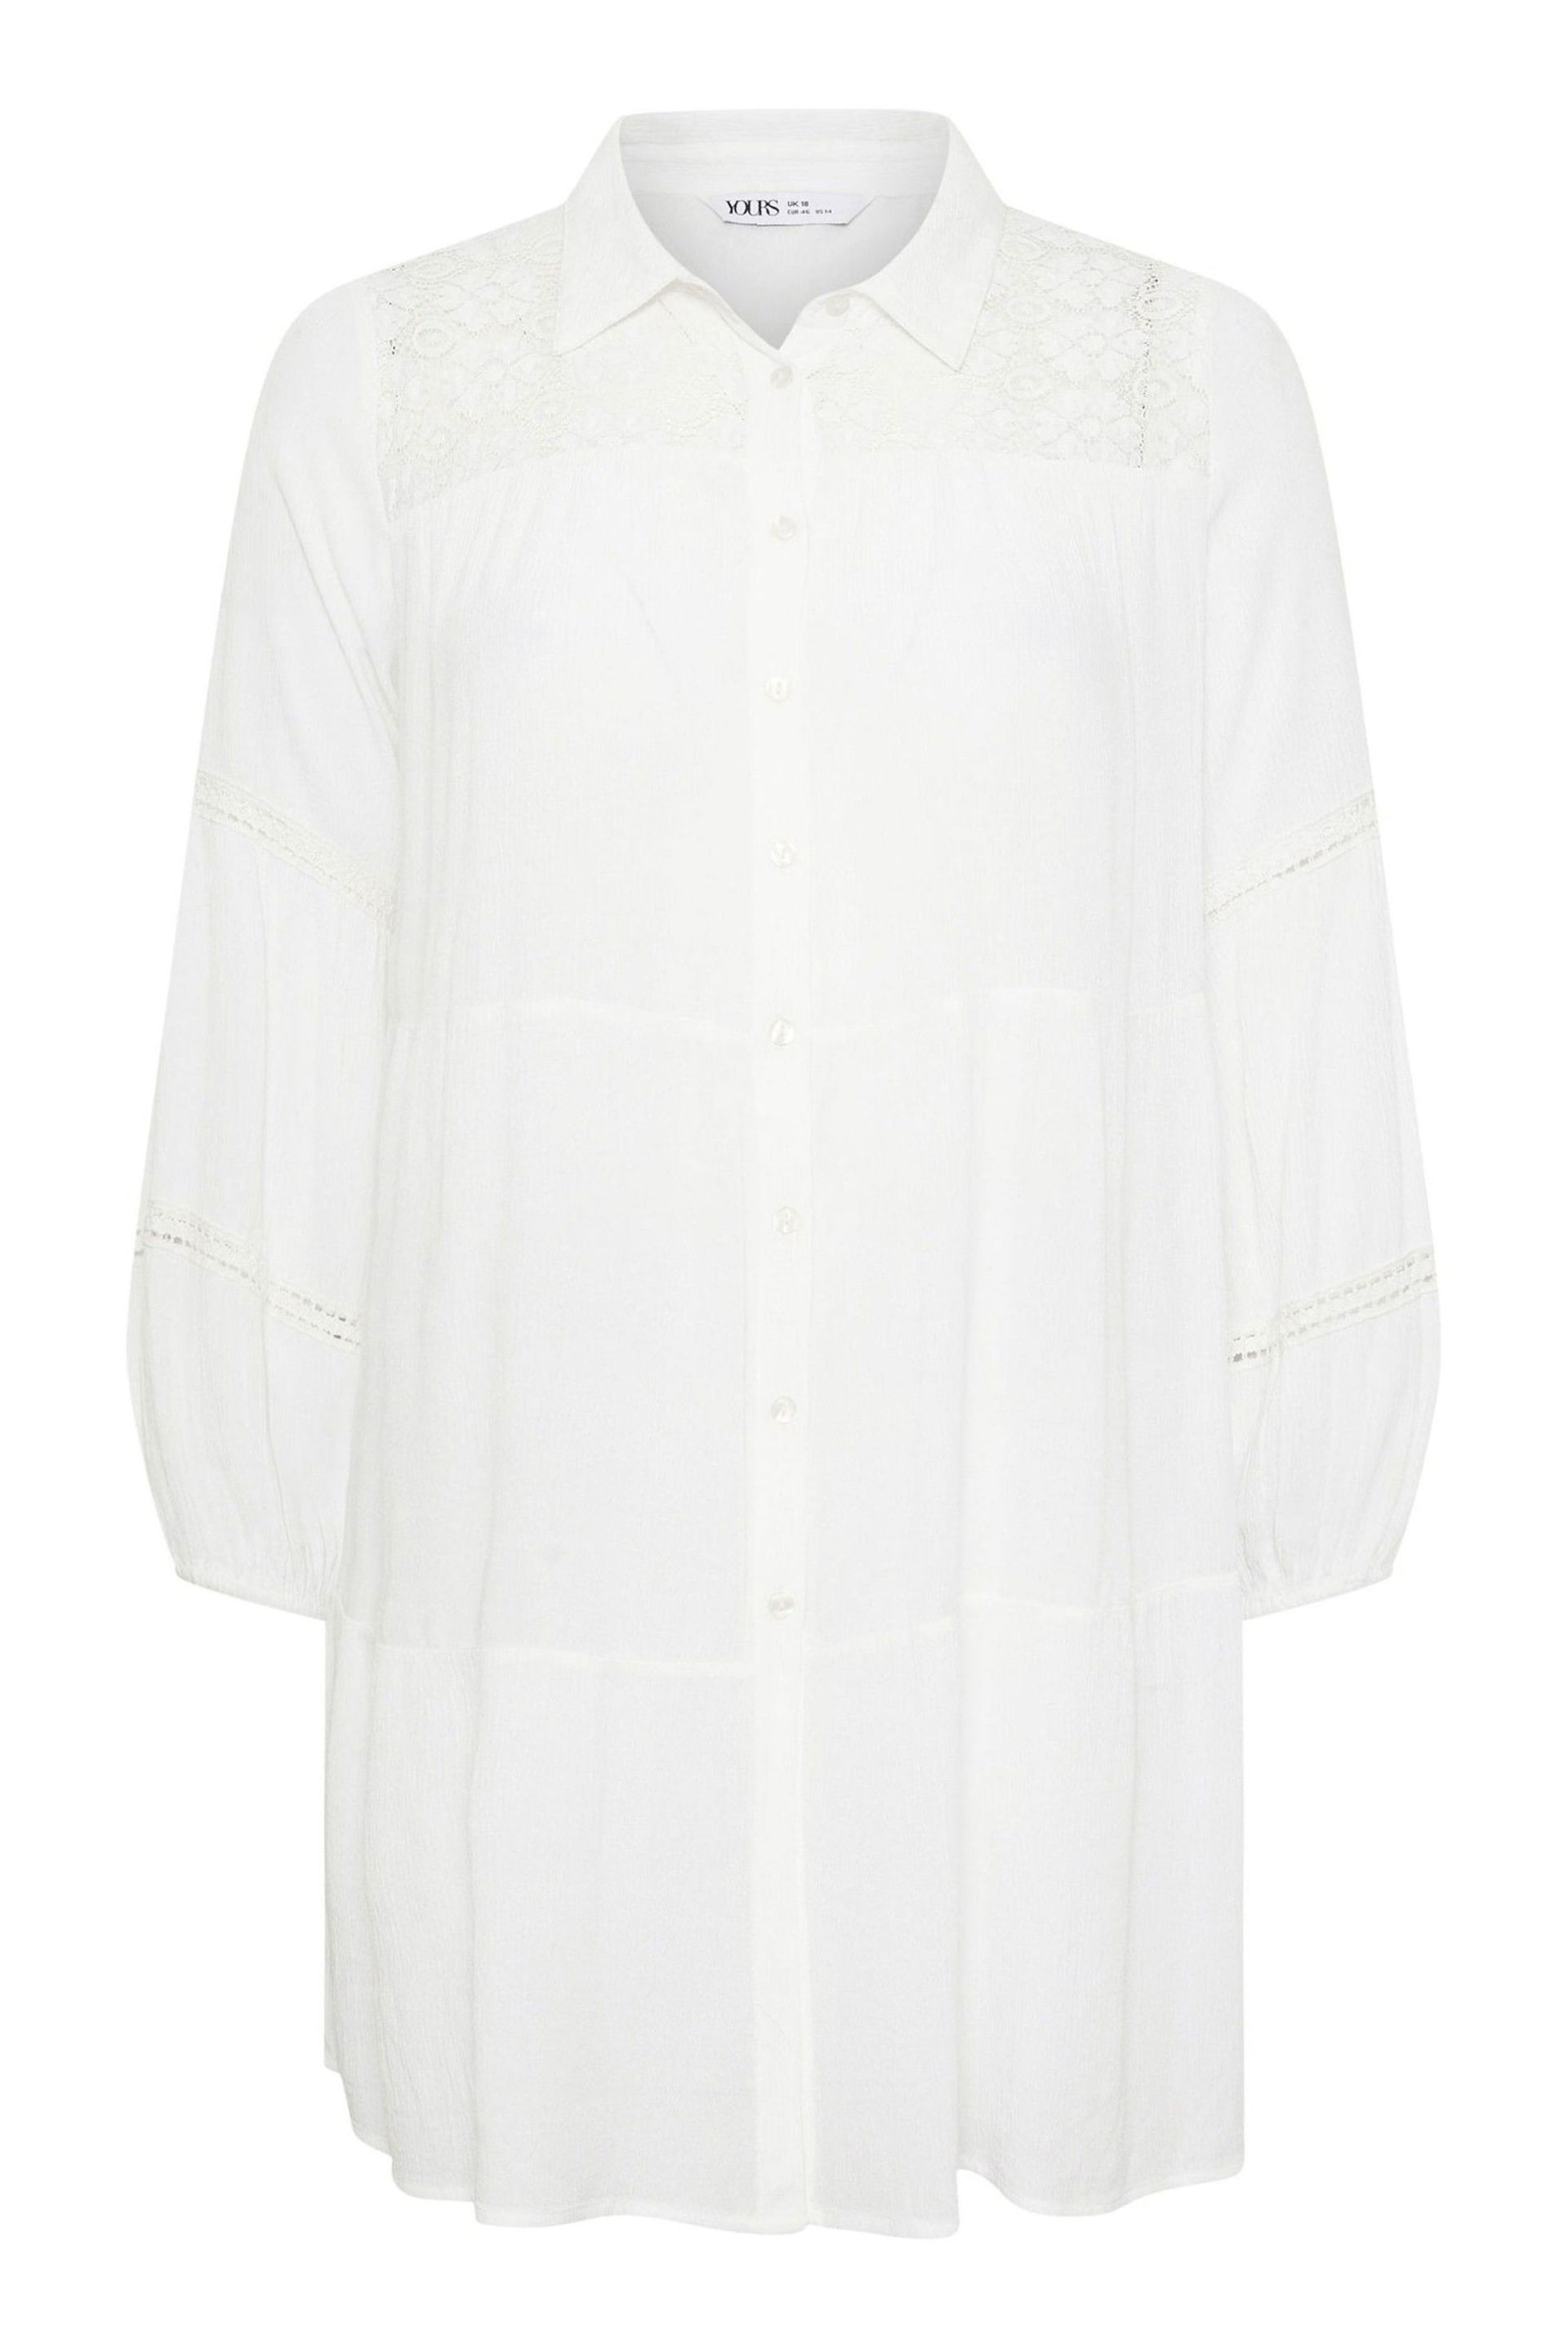 Yours Curve White Boho Long Sleeve Tiered Shirt - Image 5 of 6